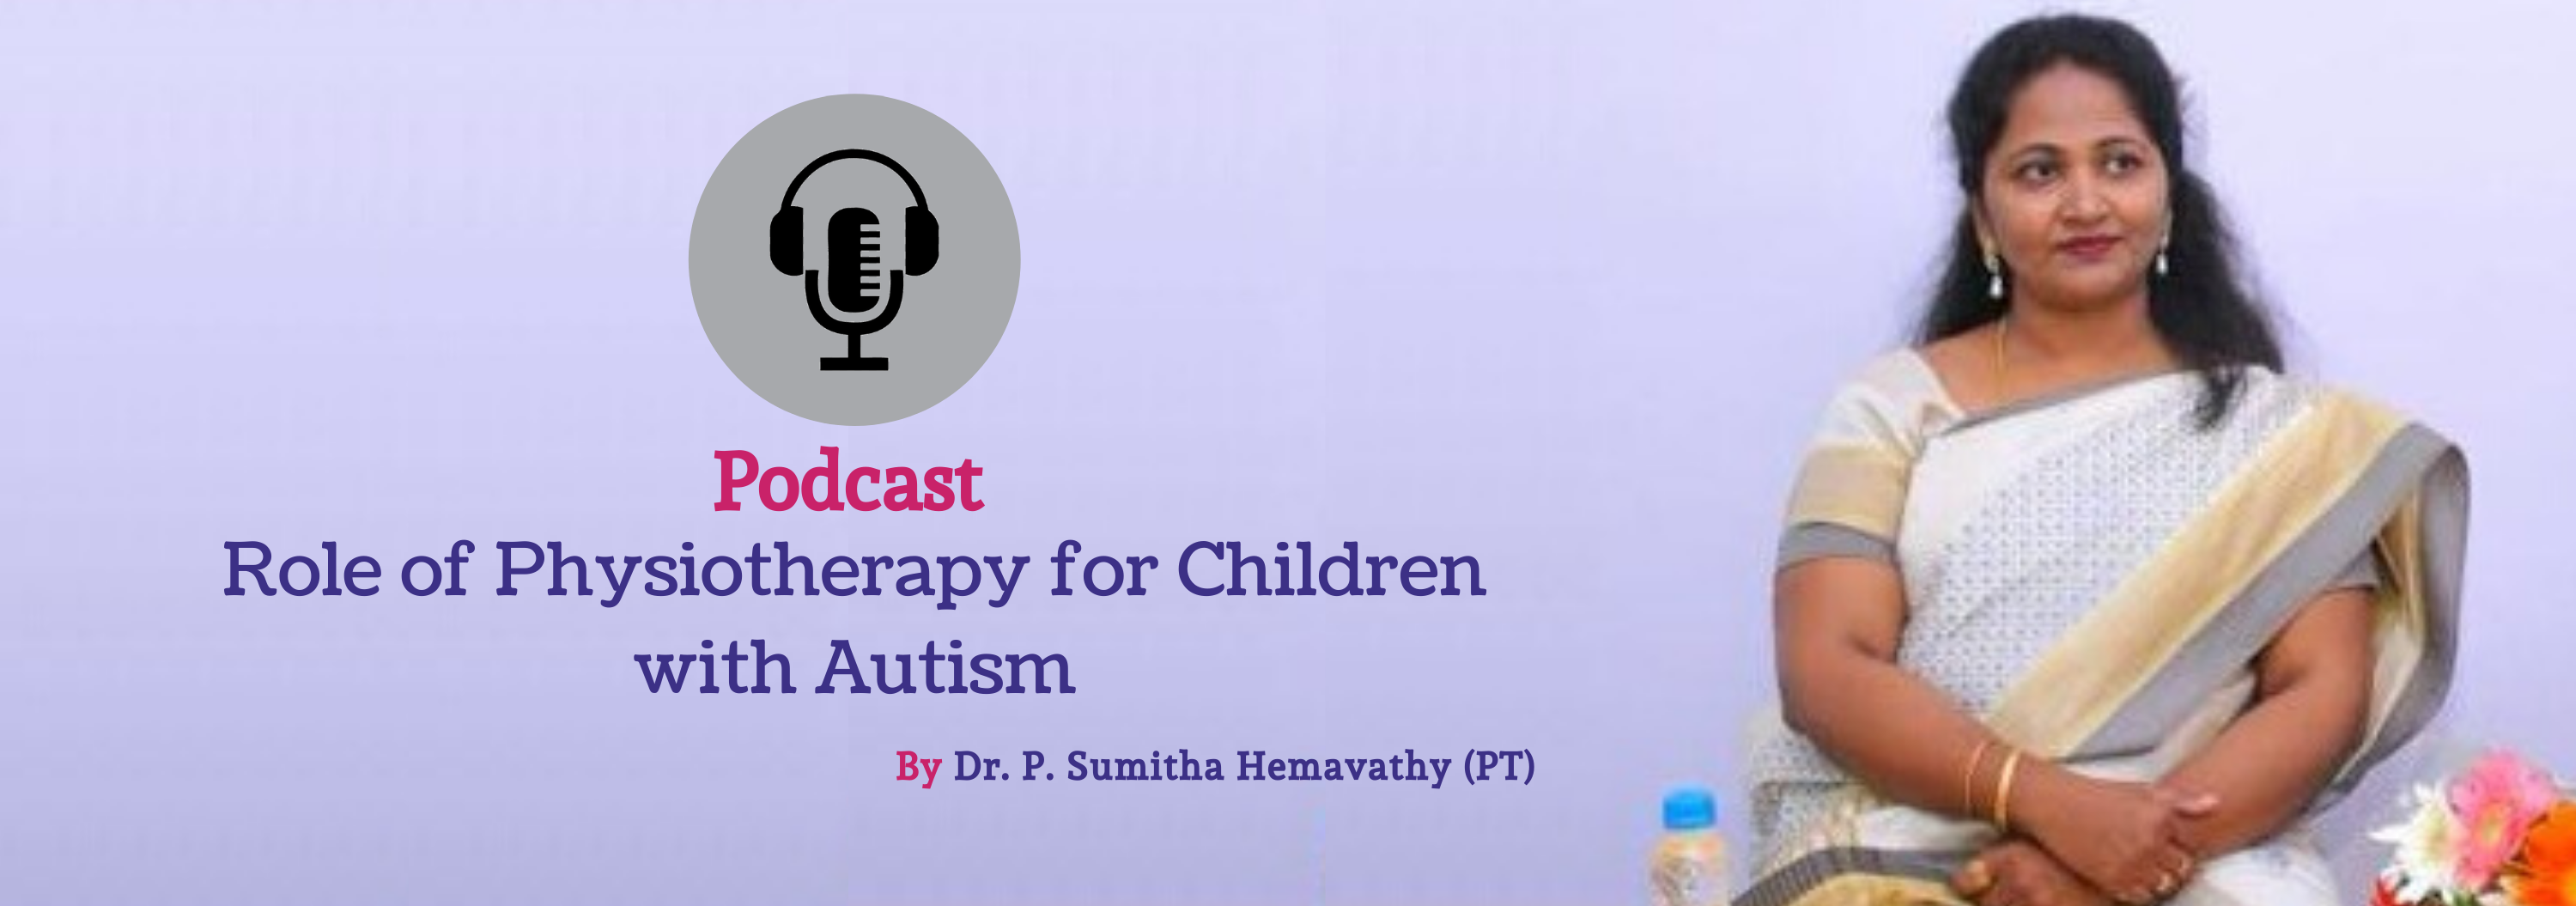 Role of Physiotherapy for Children with Autism